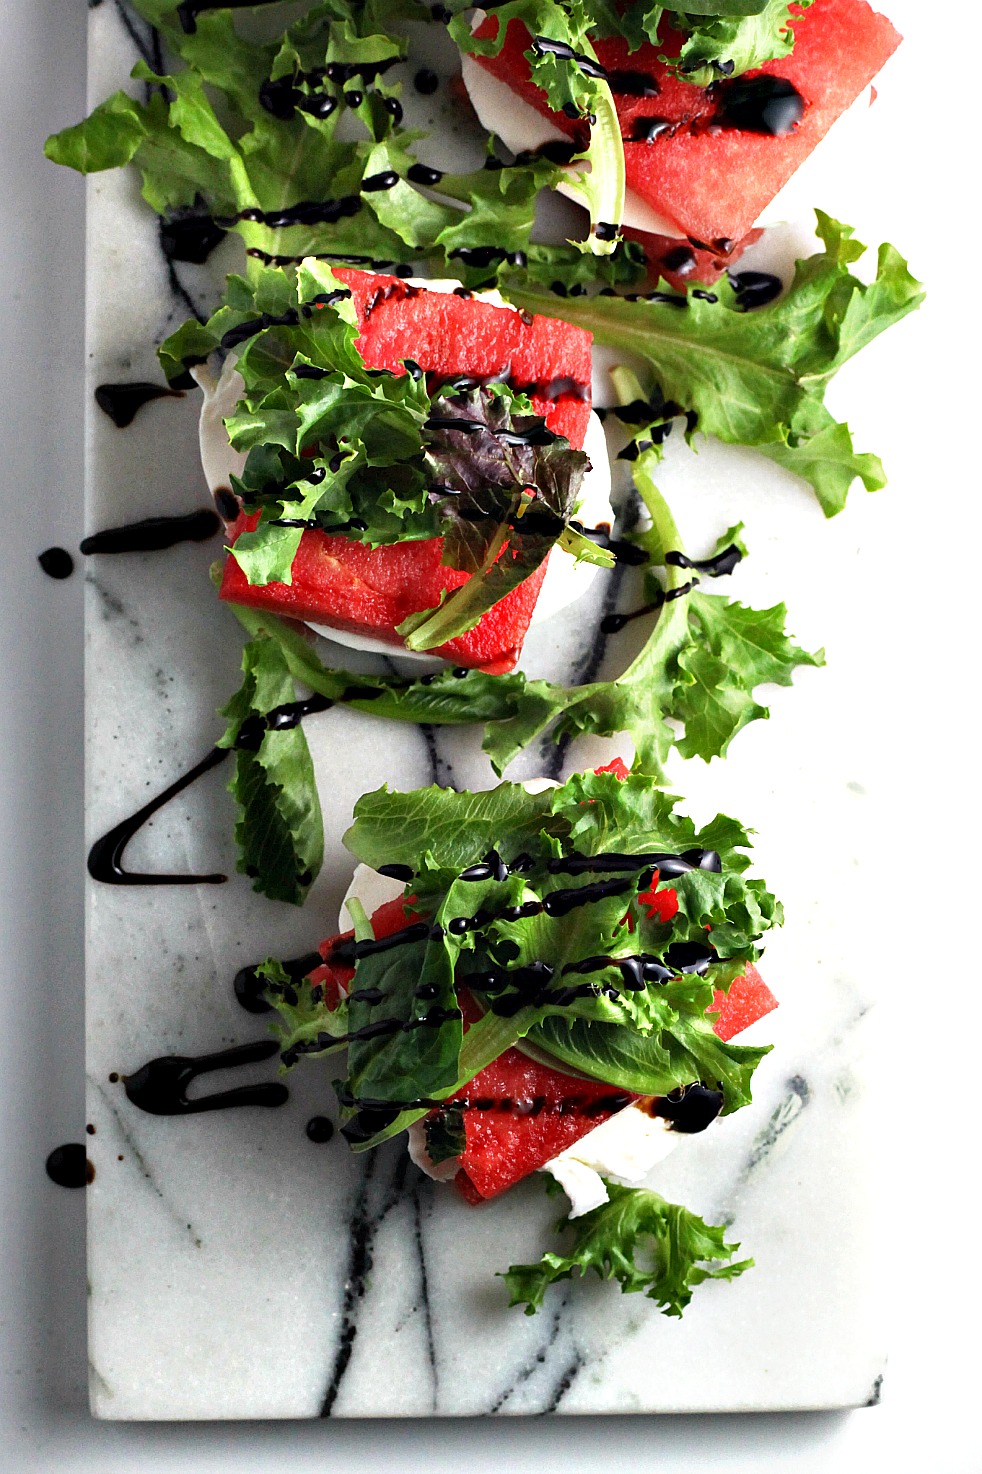 Impress your friends with this delectable, seasonal Balsamic Glazed Grilled Watermelon Stacked Salad recipe. The homemade balsamic vinaigrette highlights the fresh flavors of the watermelon, arugula, and mozzarella.